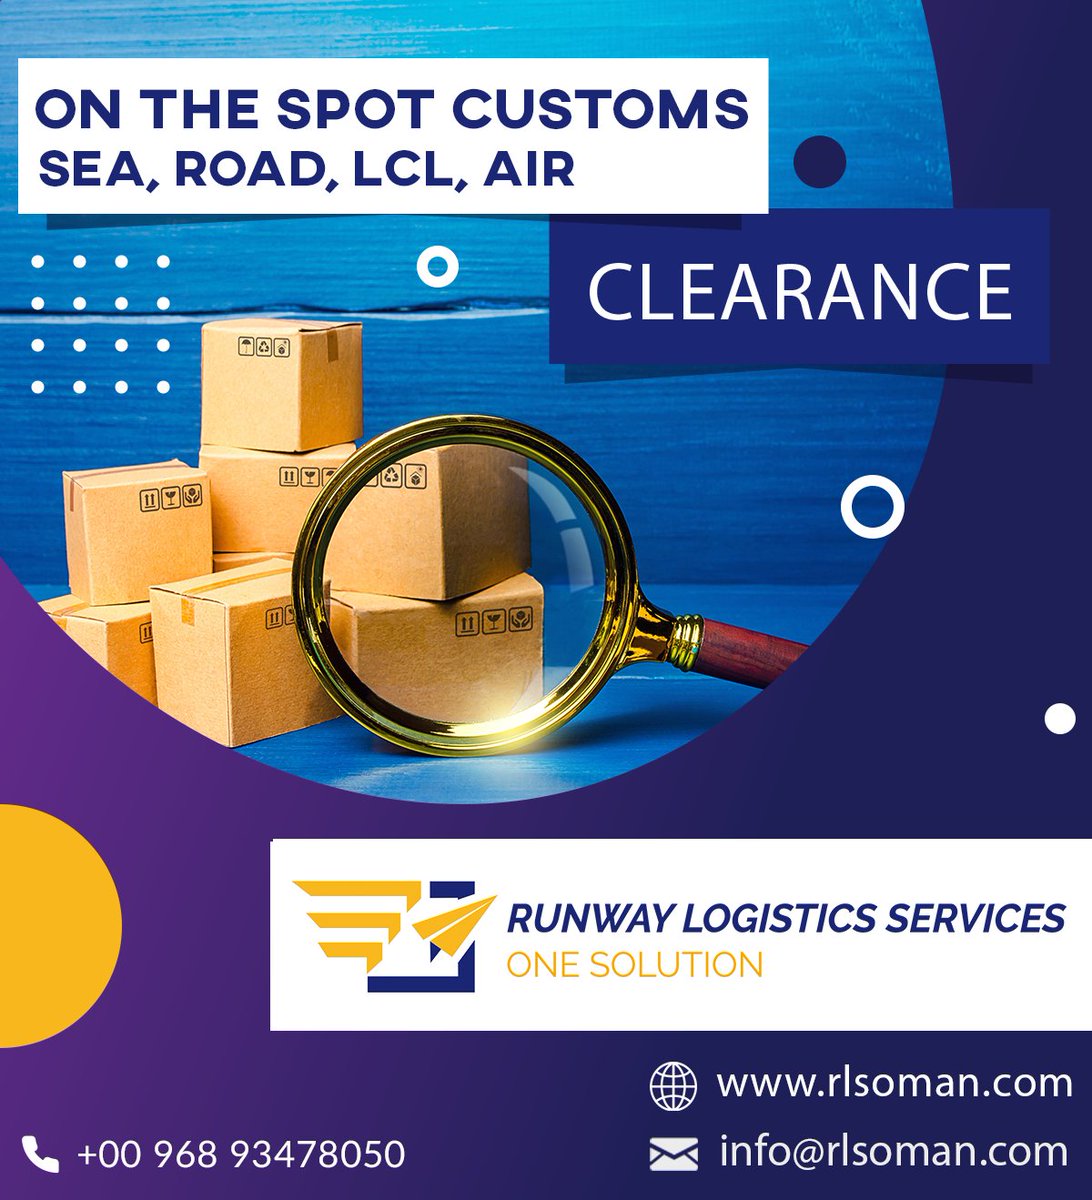 On the Spot Customs Clearance - Sea, Road, LCL, Air in Sultanate of Oman
Call us : 0096893478050
Mail : info@rlsoman.com
rlsoman.com
 #seafrightservices  #customsclearance #seacustomsclearance #aircustomsclearanceservices #lclcustomsclearance #customsclearence